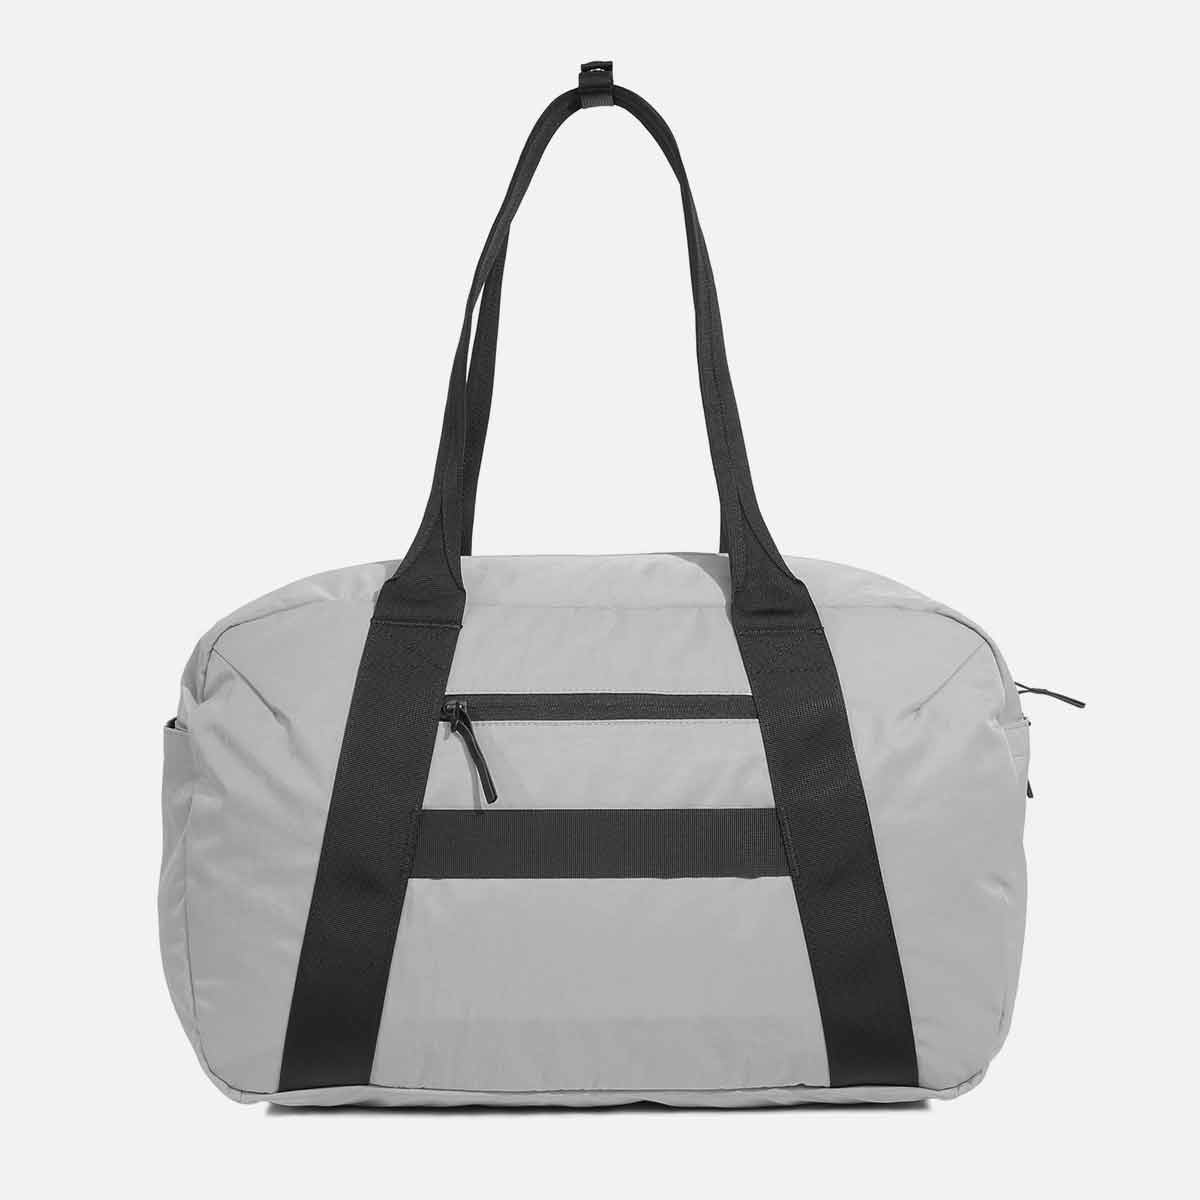 Go Duffel 2 Gray | Aer ｜ エアー公式通販サイト